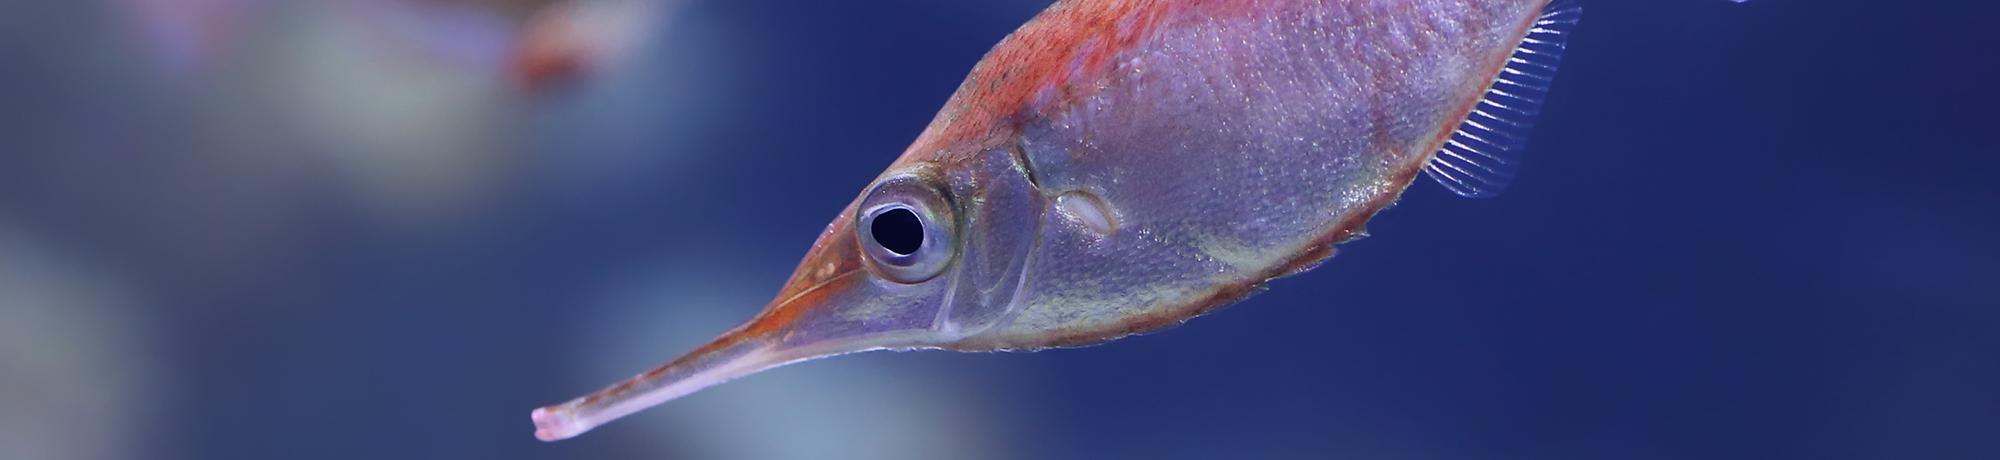 Closeup shot of a fish on blue background